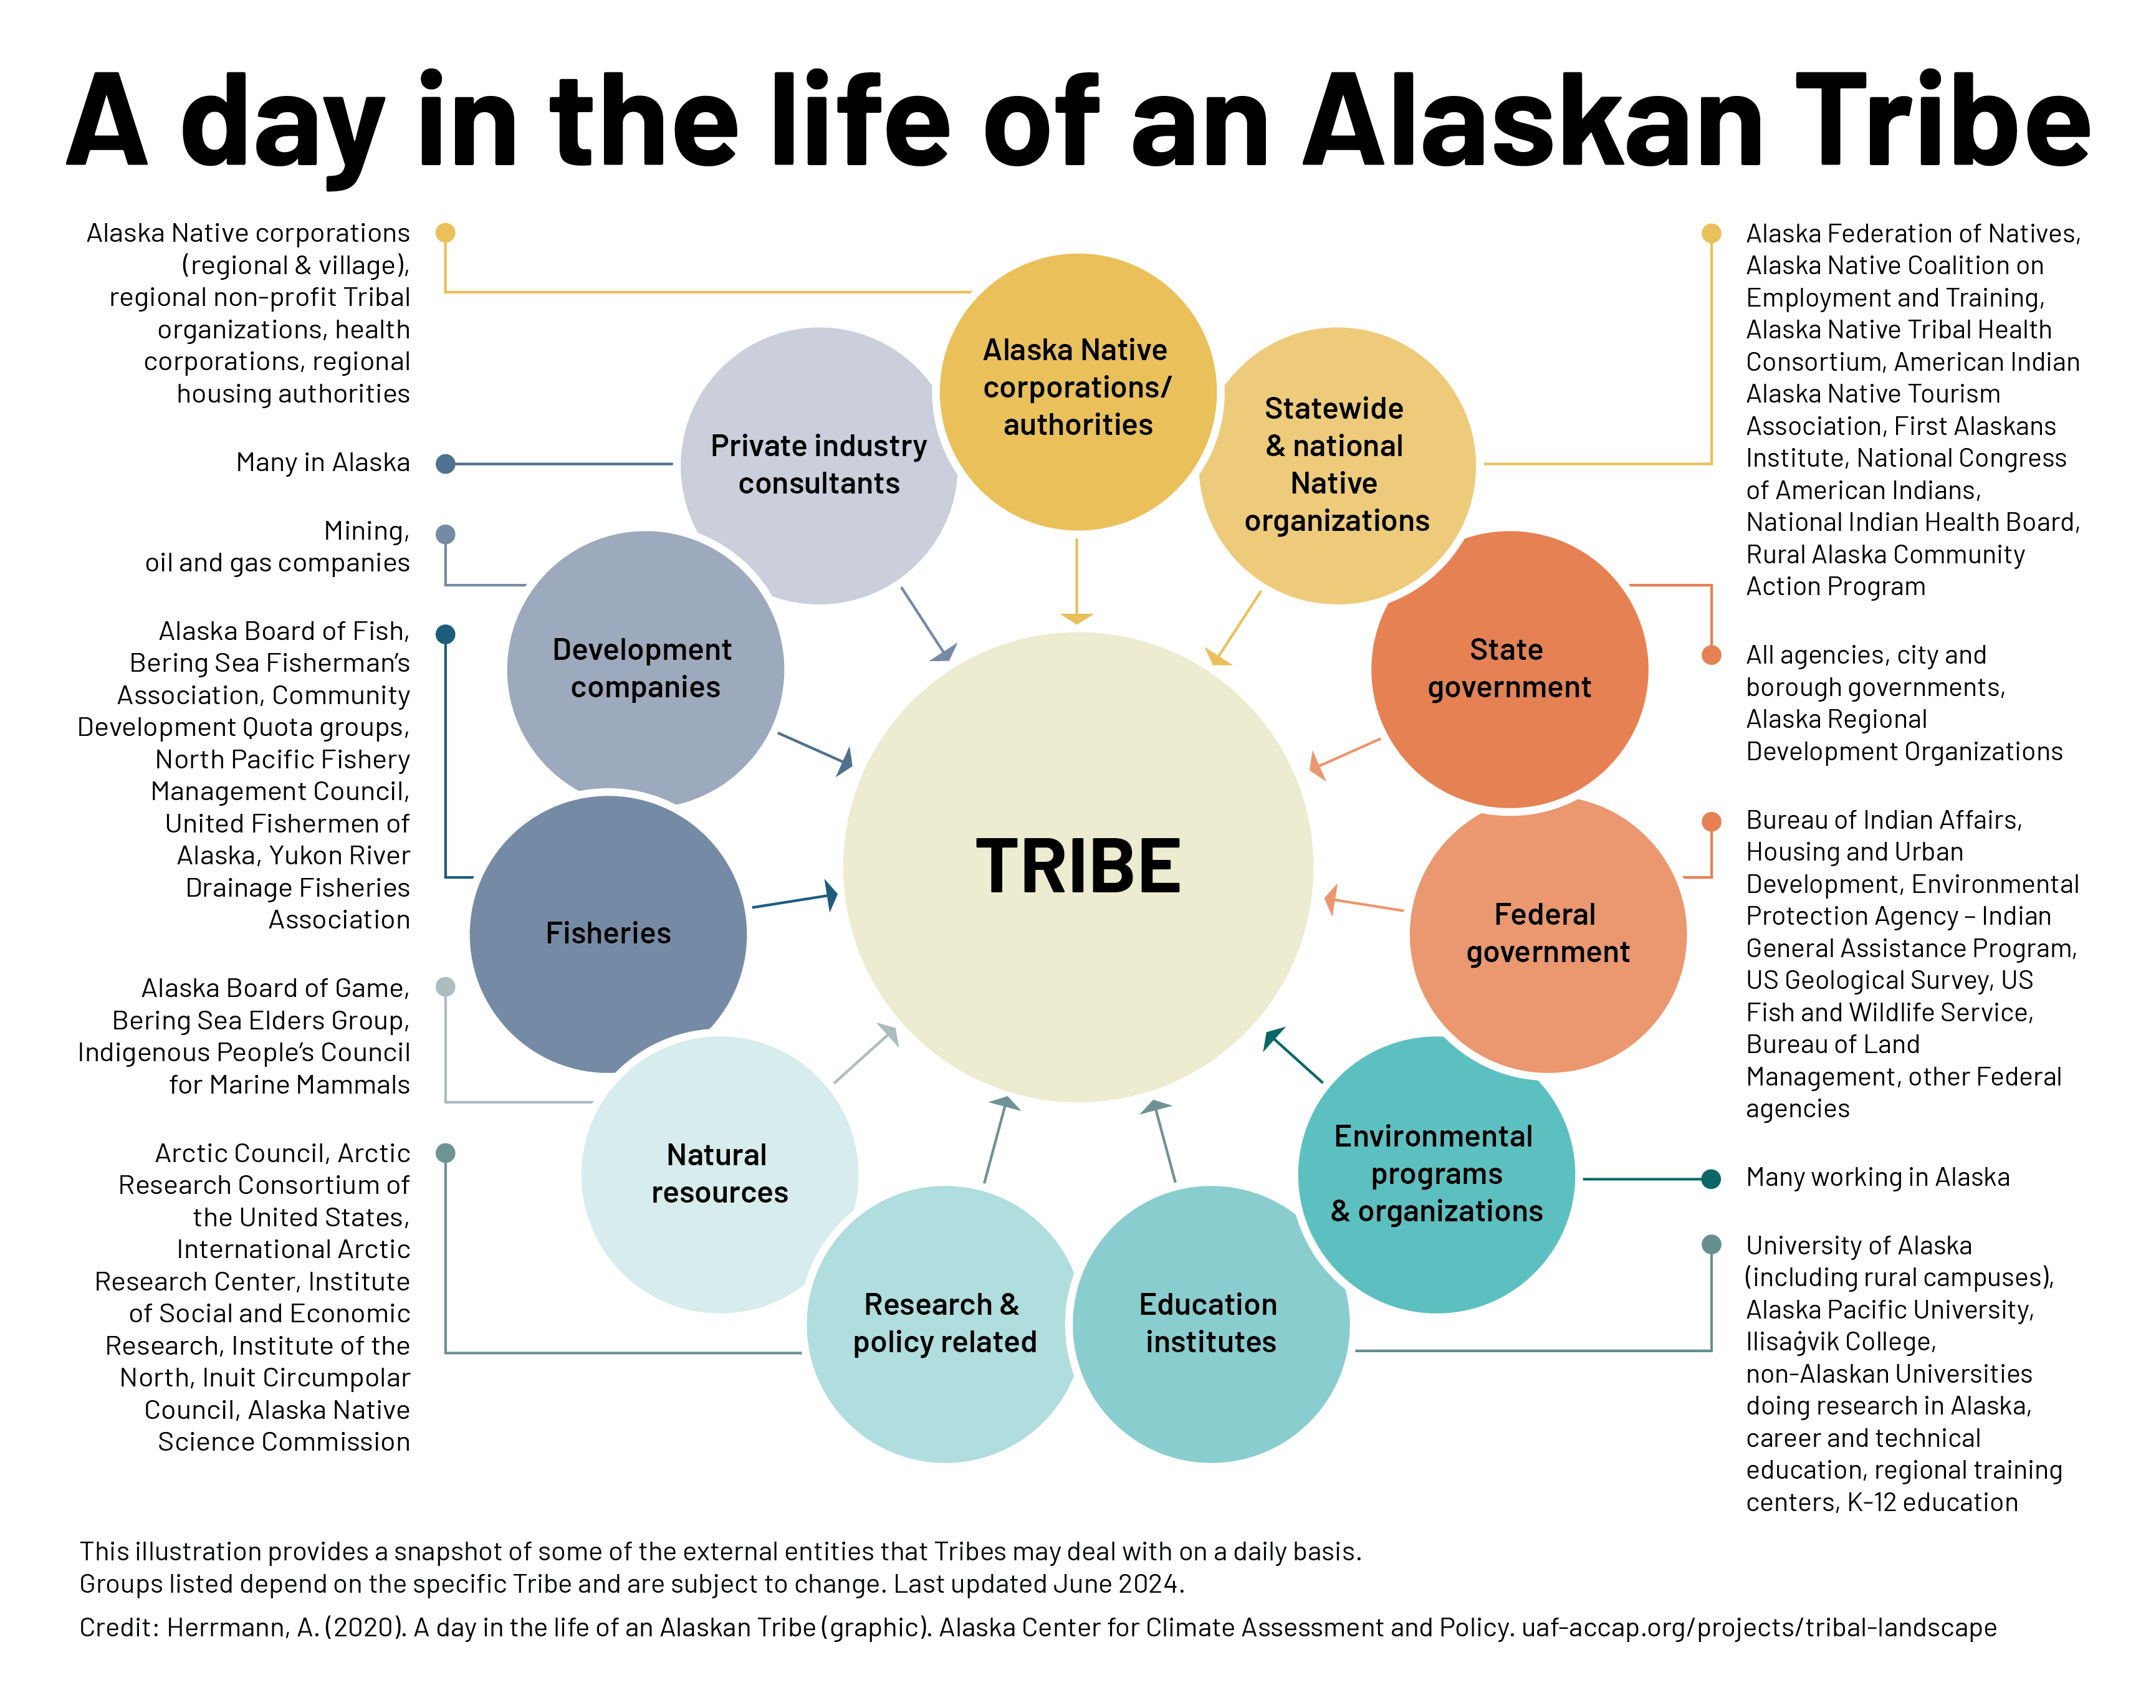 A day in the life of an Alaskan Tribe graphic.